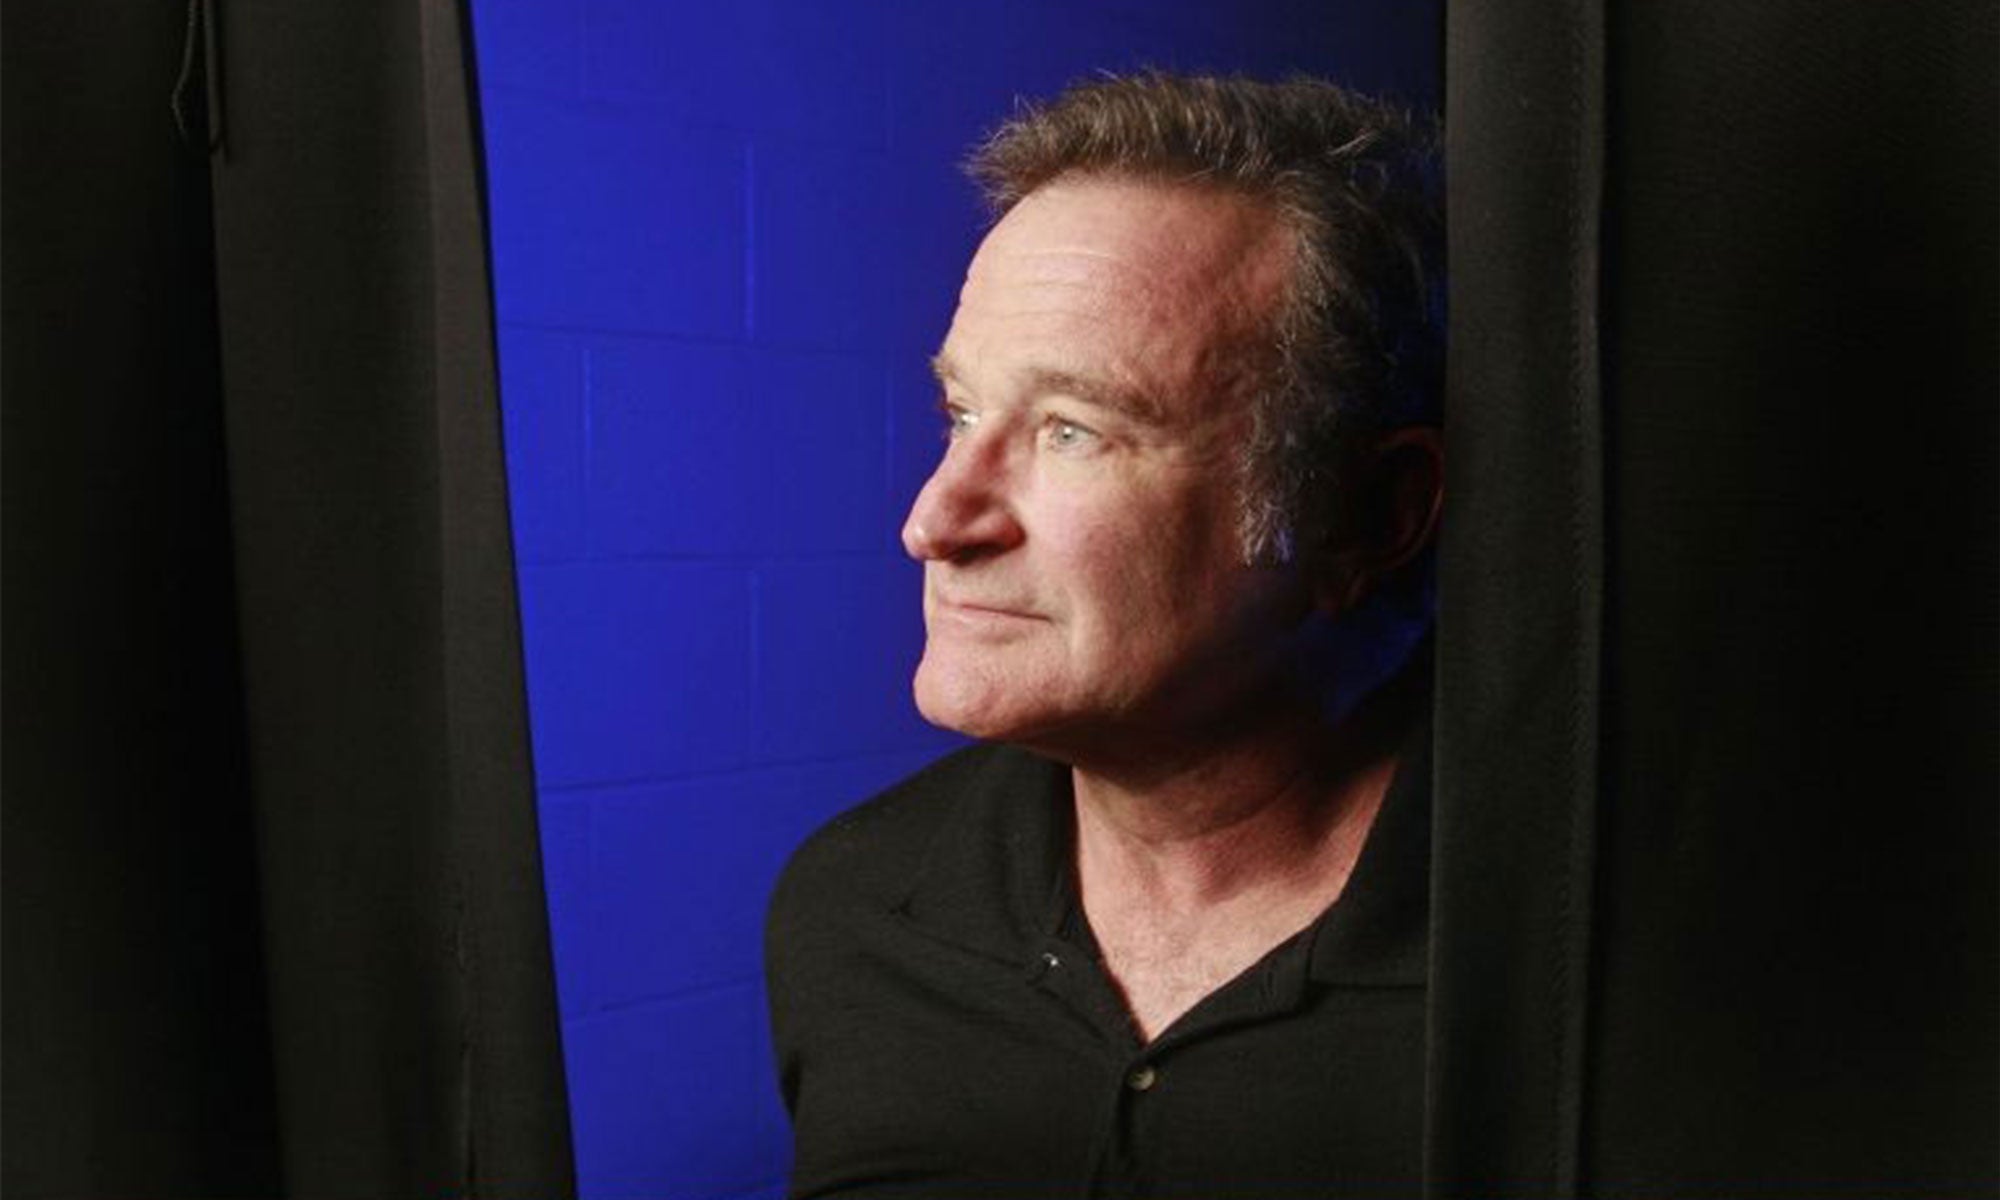 Robin Williams was found dead aged 63 on Monday